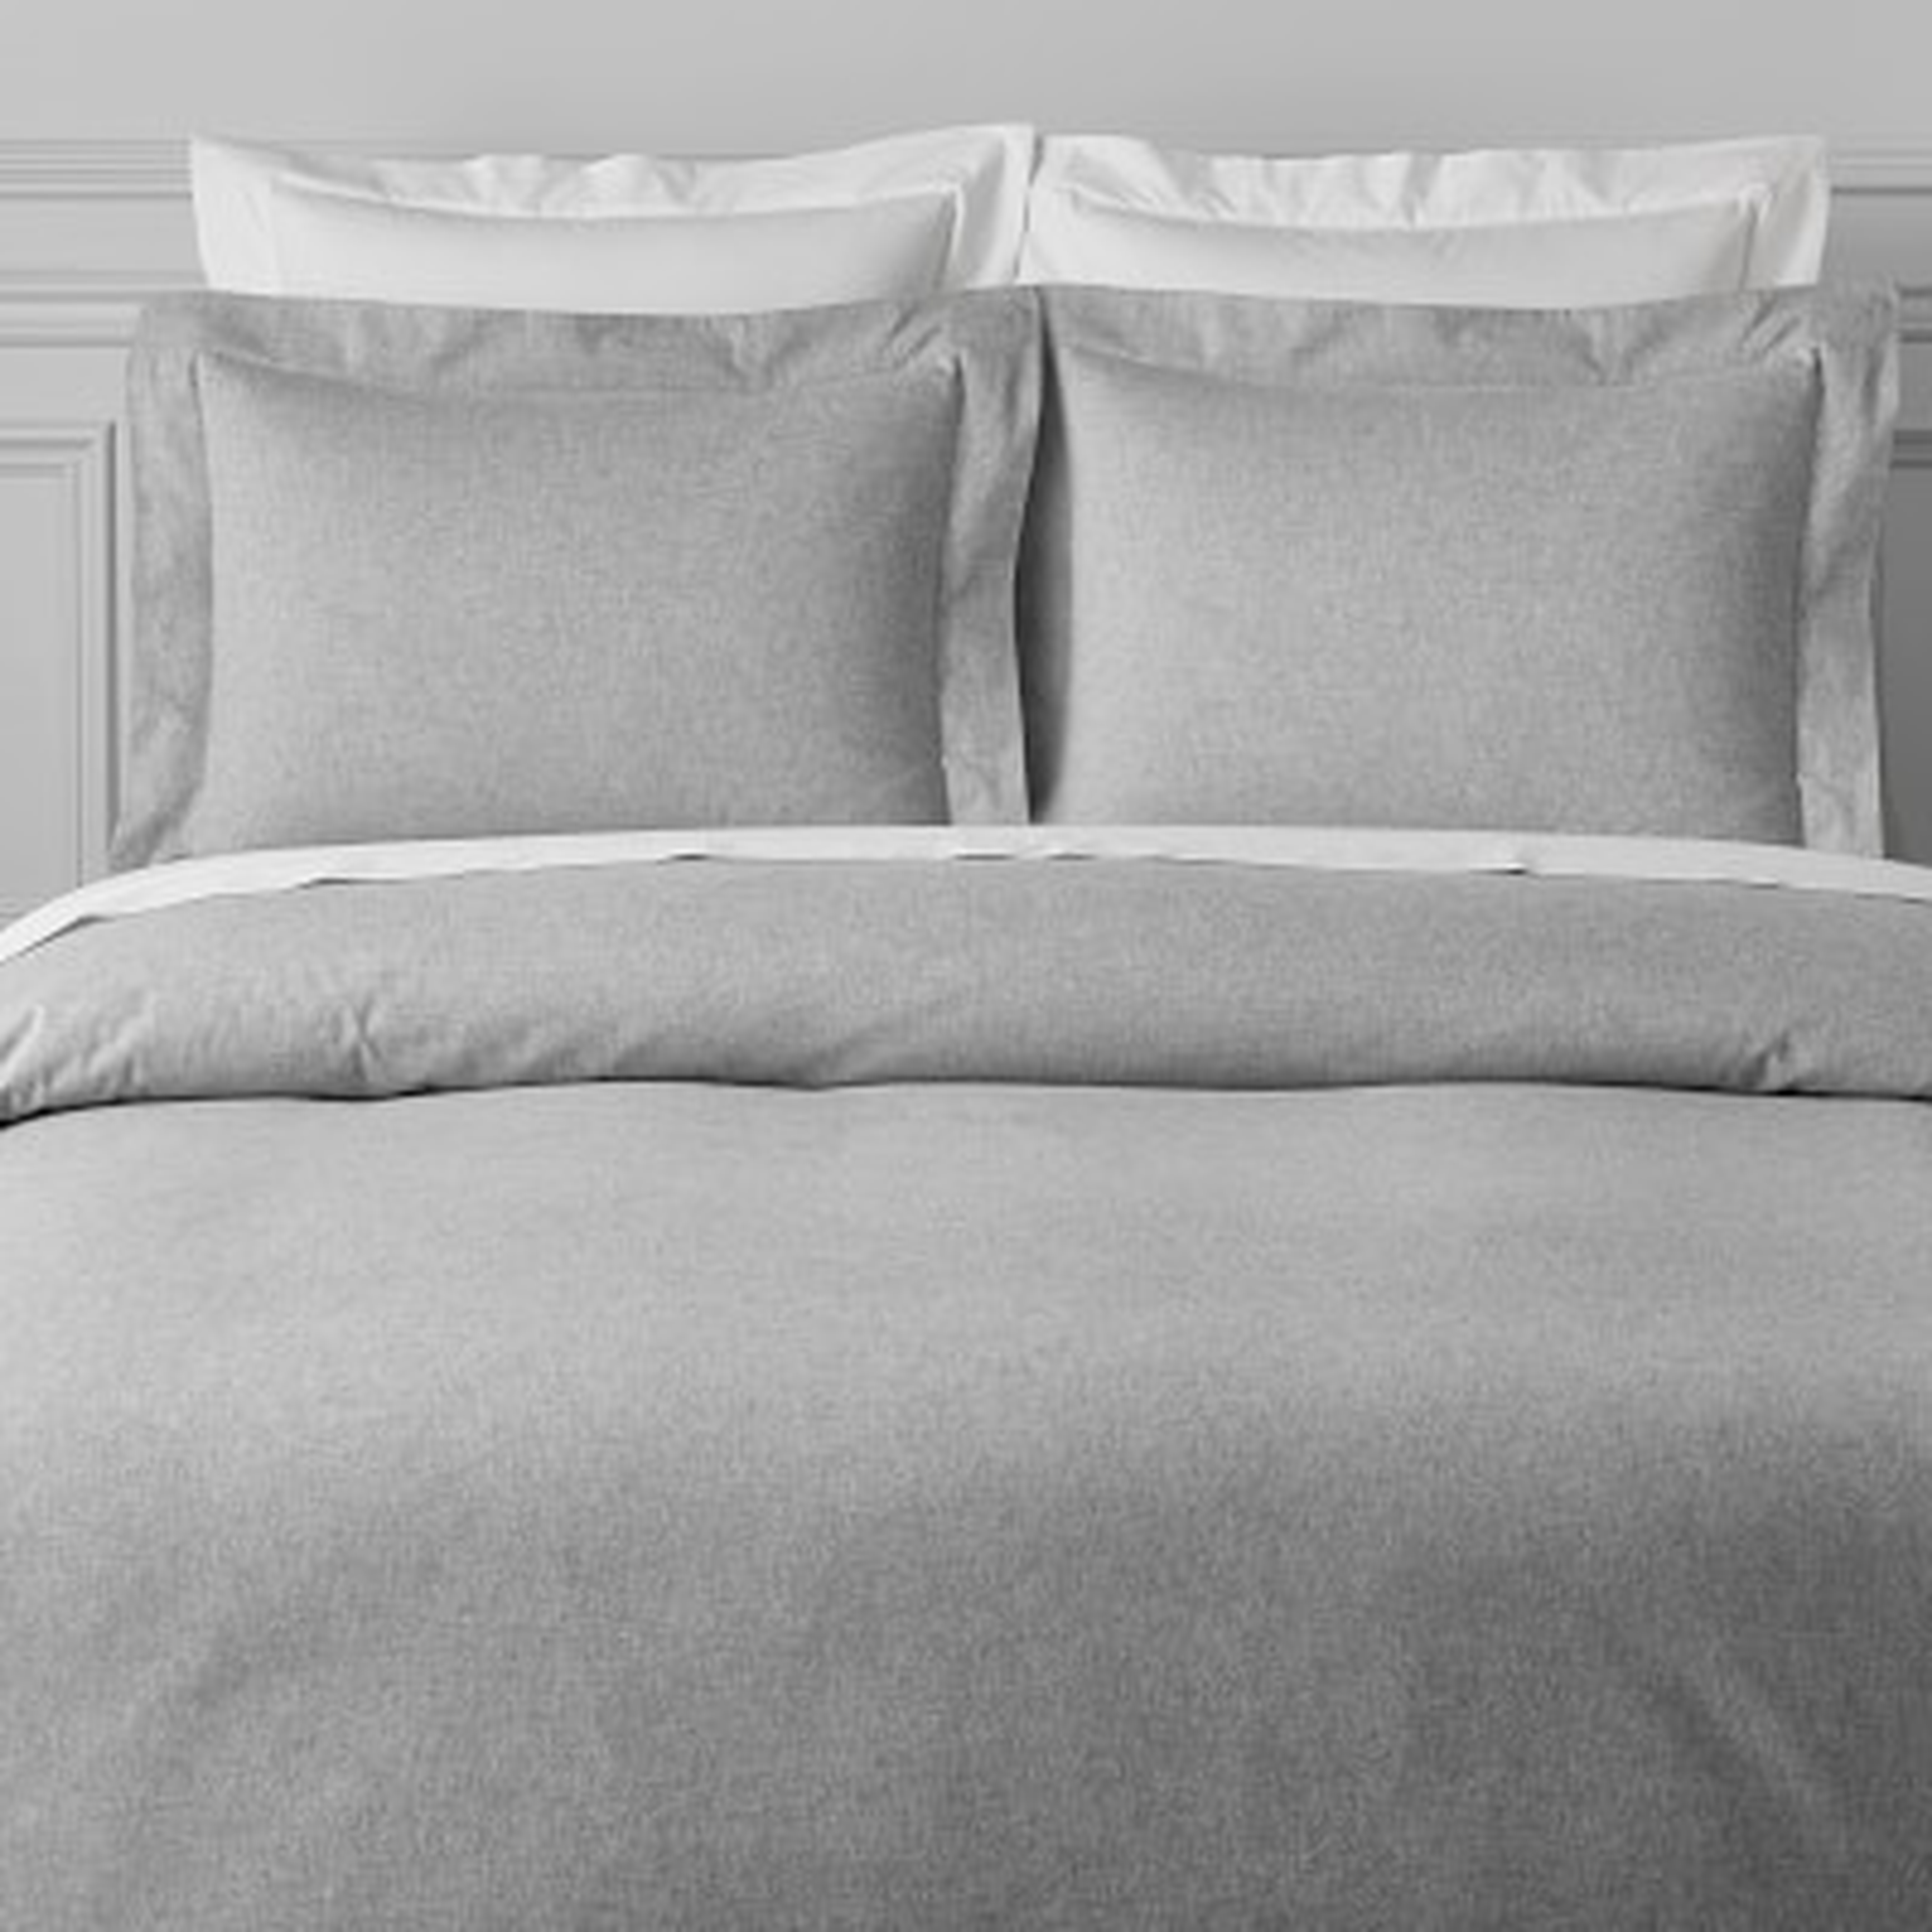 Solid Flannel Bedding, Duvet Cover, King/Cal King, Light Grey - Williams Sonoma